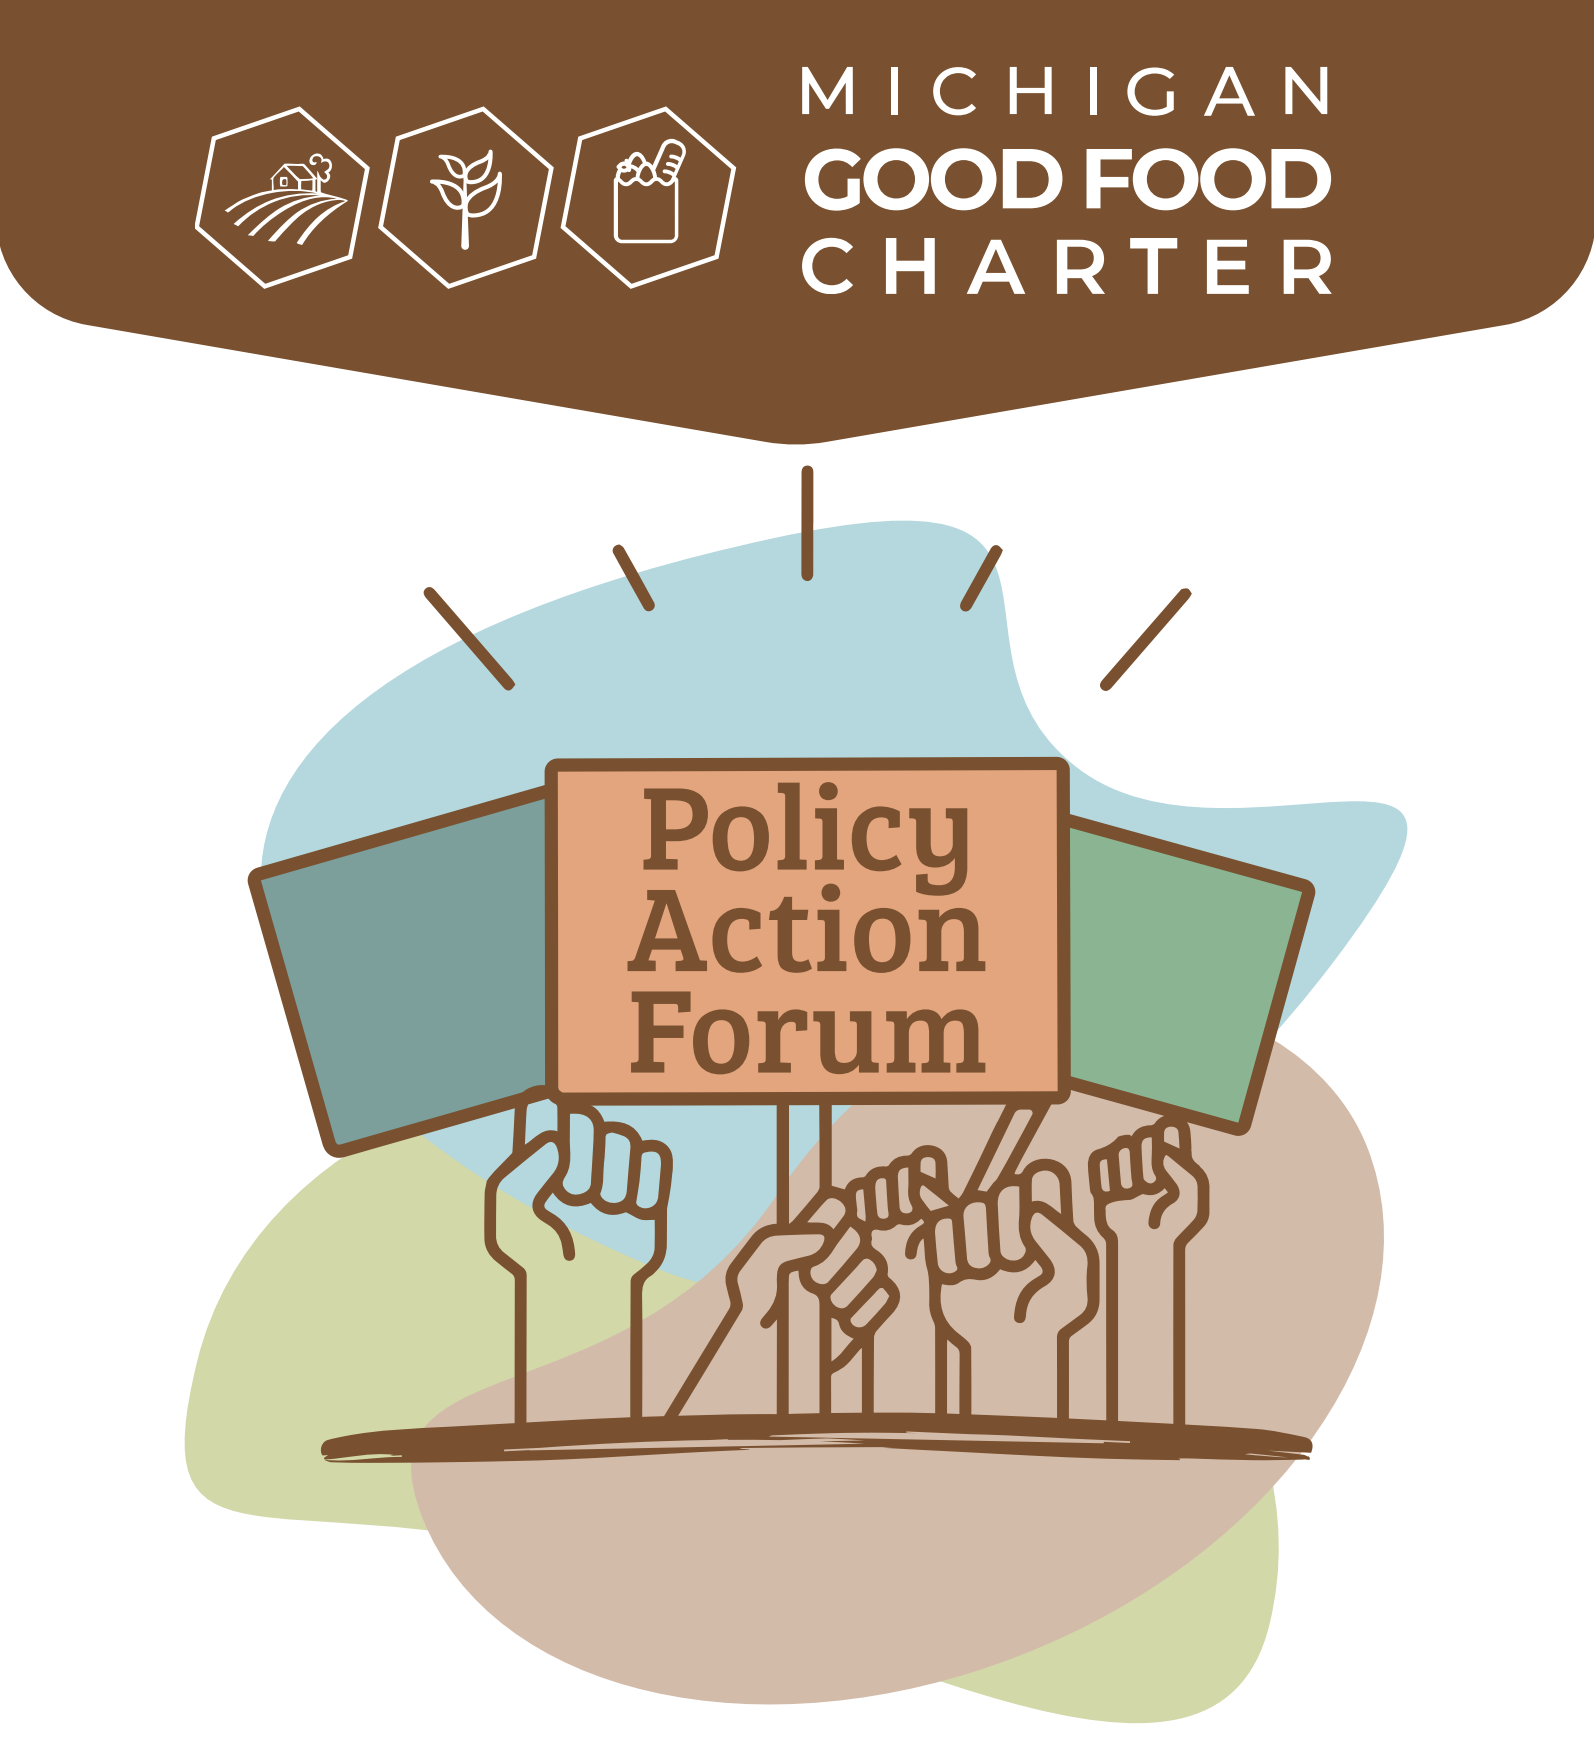 The Michigan Good Food Charter Policy Action logo includes an illustration of multiple raised fists and signs.